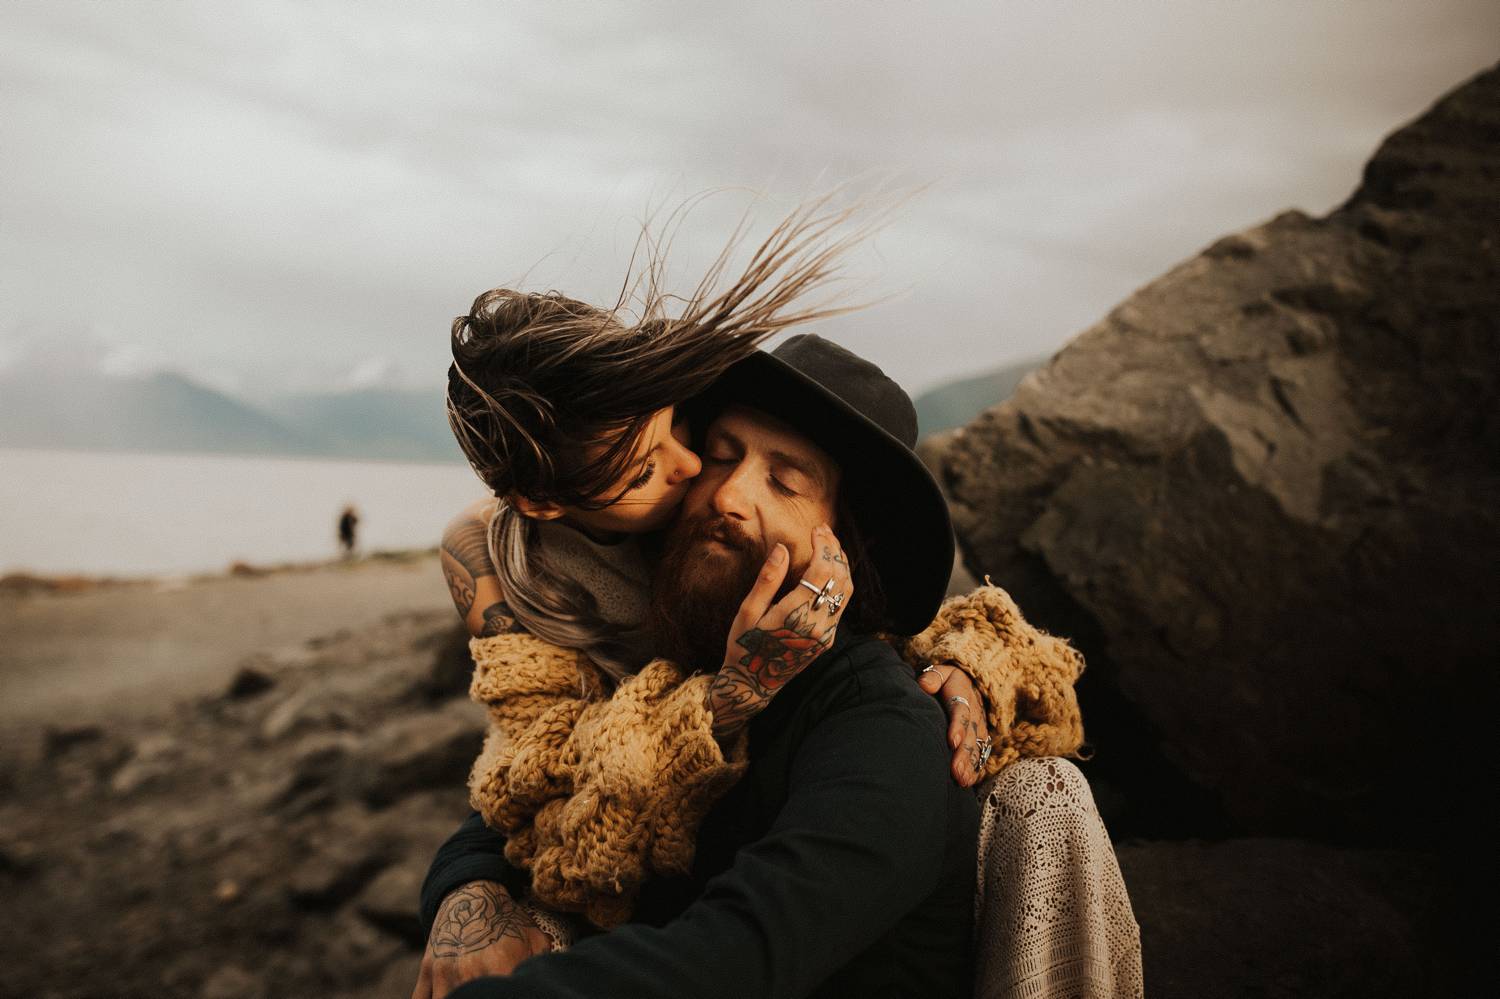 A man in a black hat sits on rocks by the ocean. A woman with her hair blowing in the wind wraps her arms around him and kisses him.